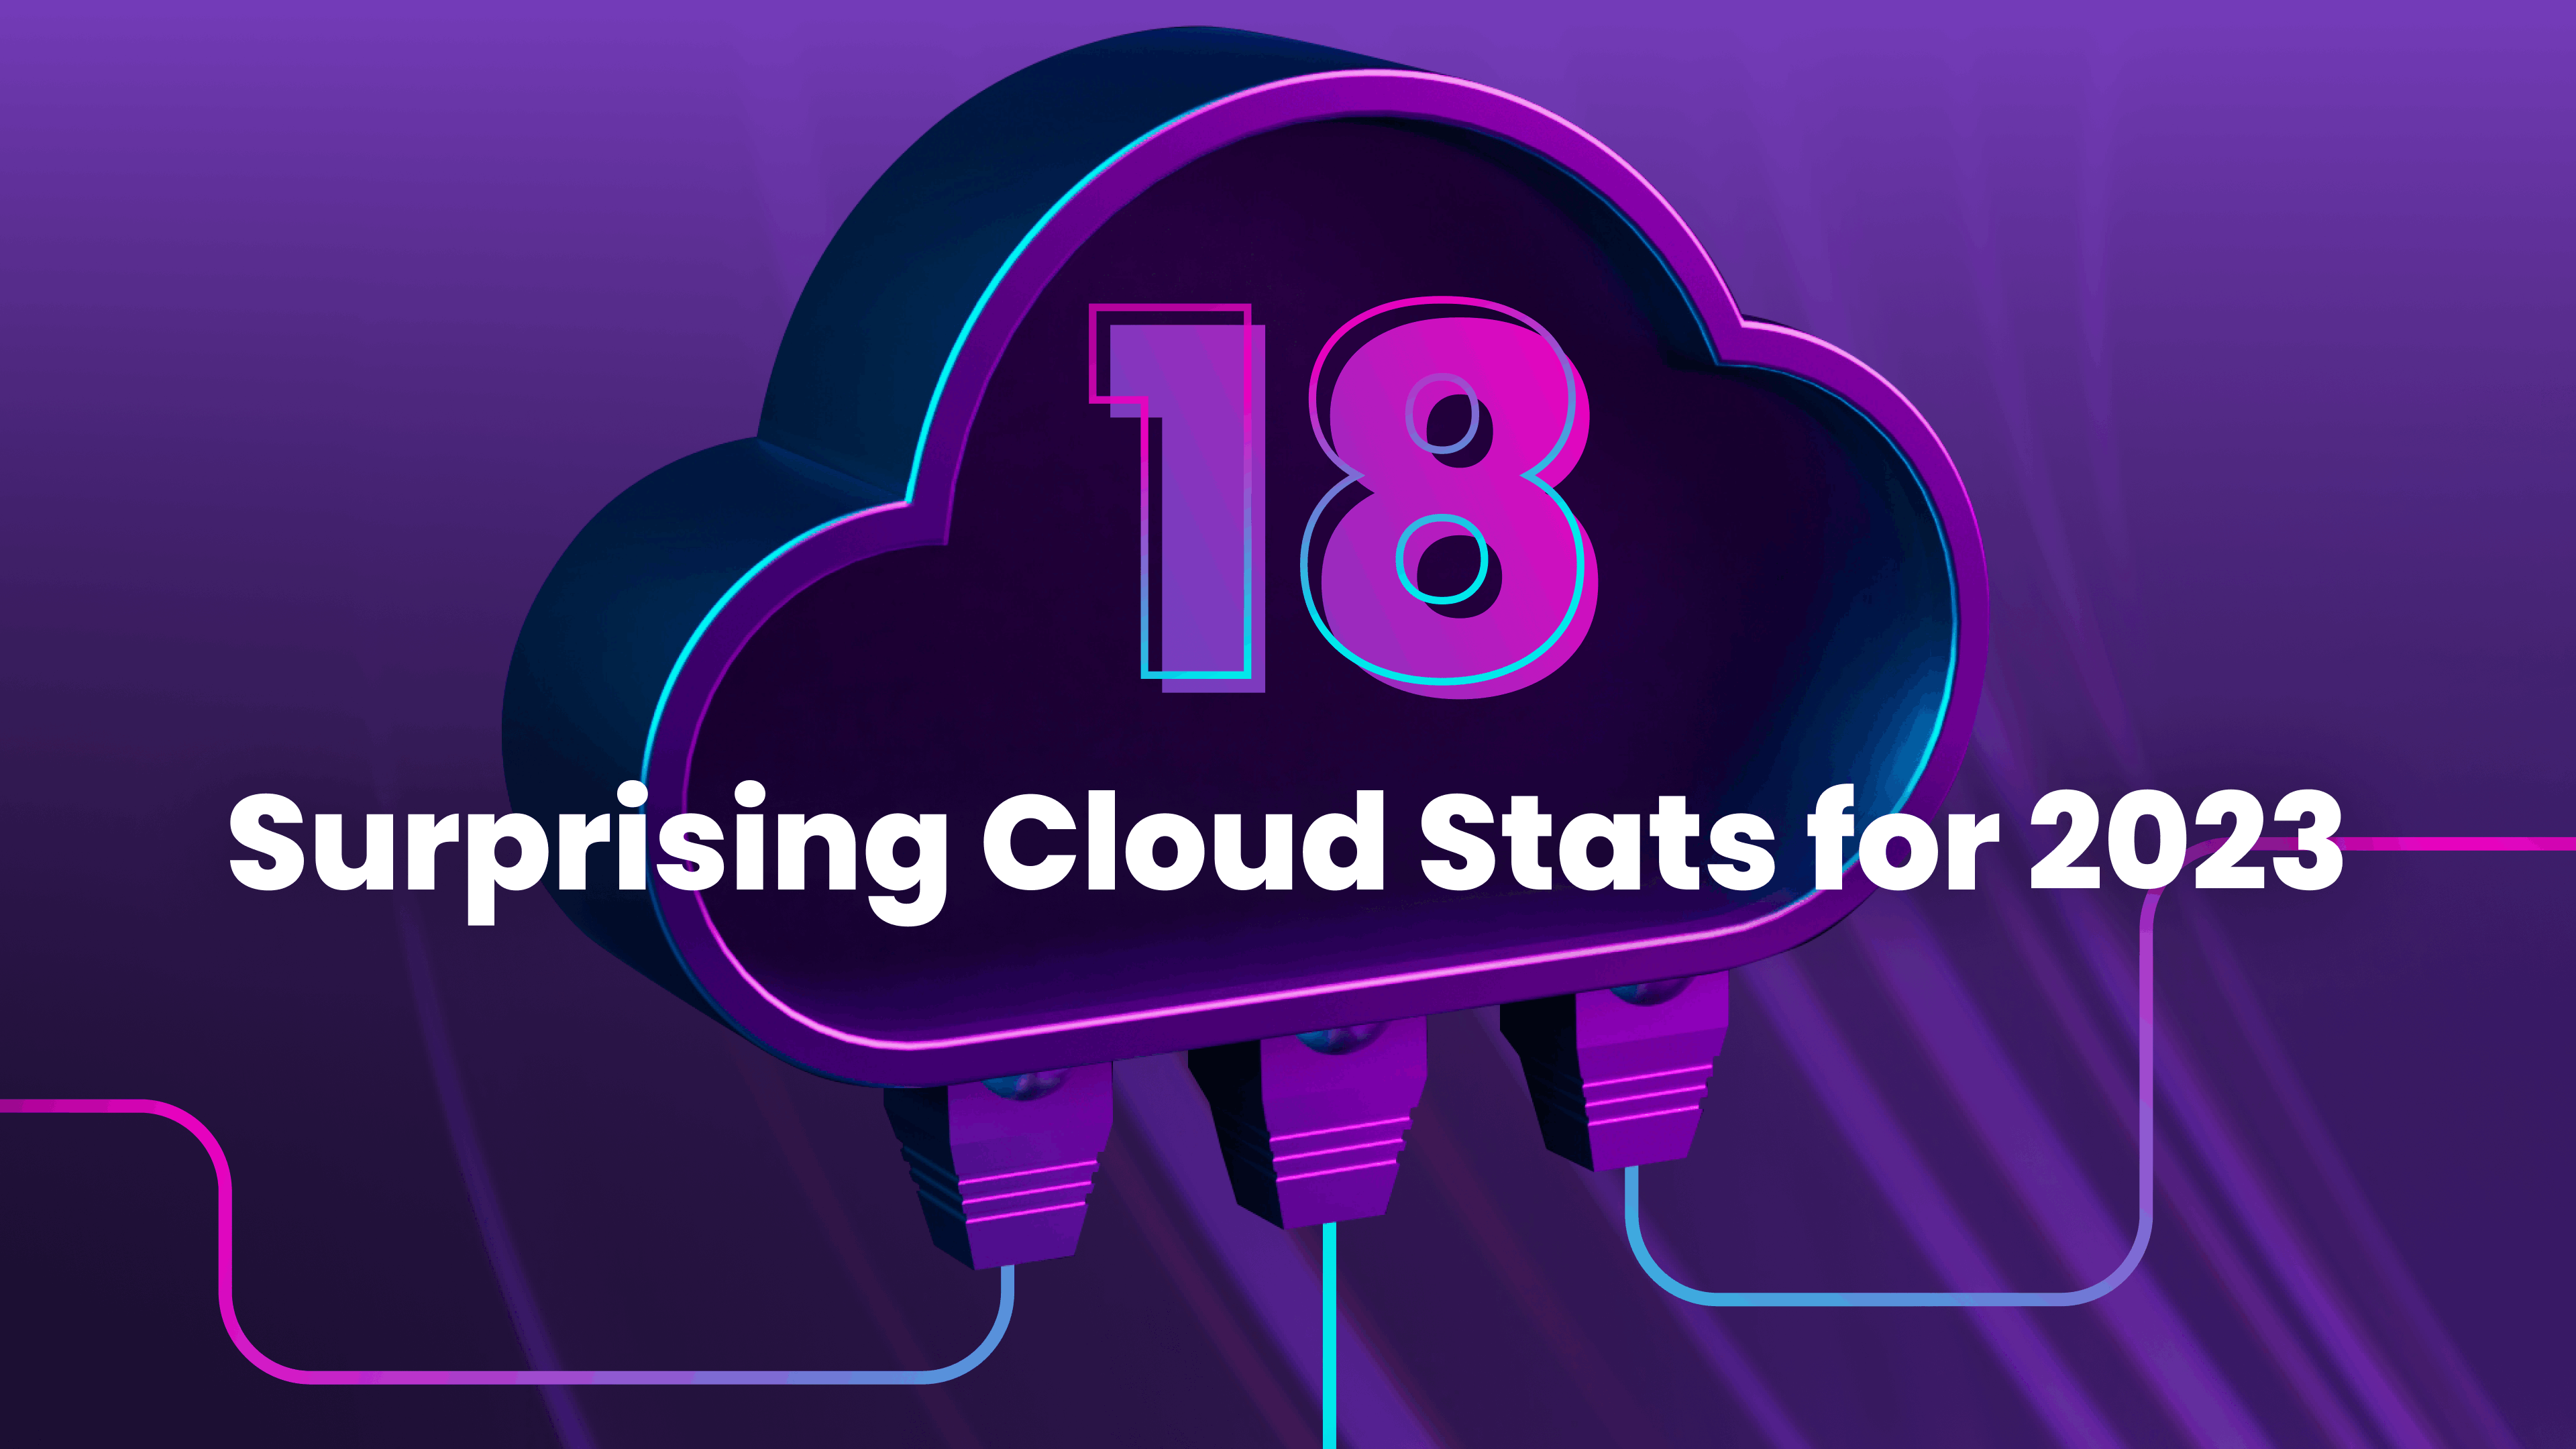 Is Data Storage Holding Cloud Adoption Back? 18 Surprising Cloud Stats for 2023